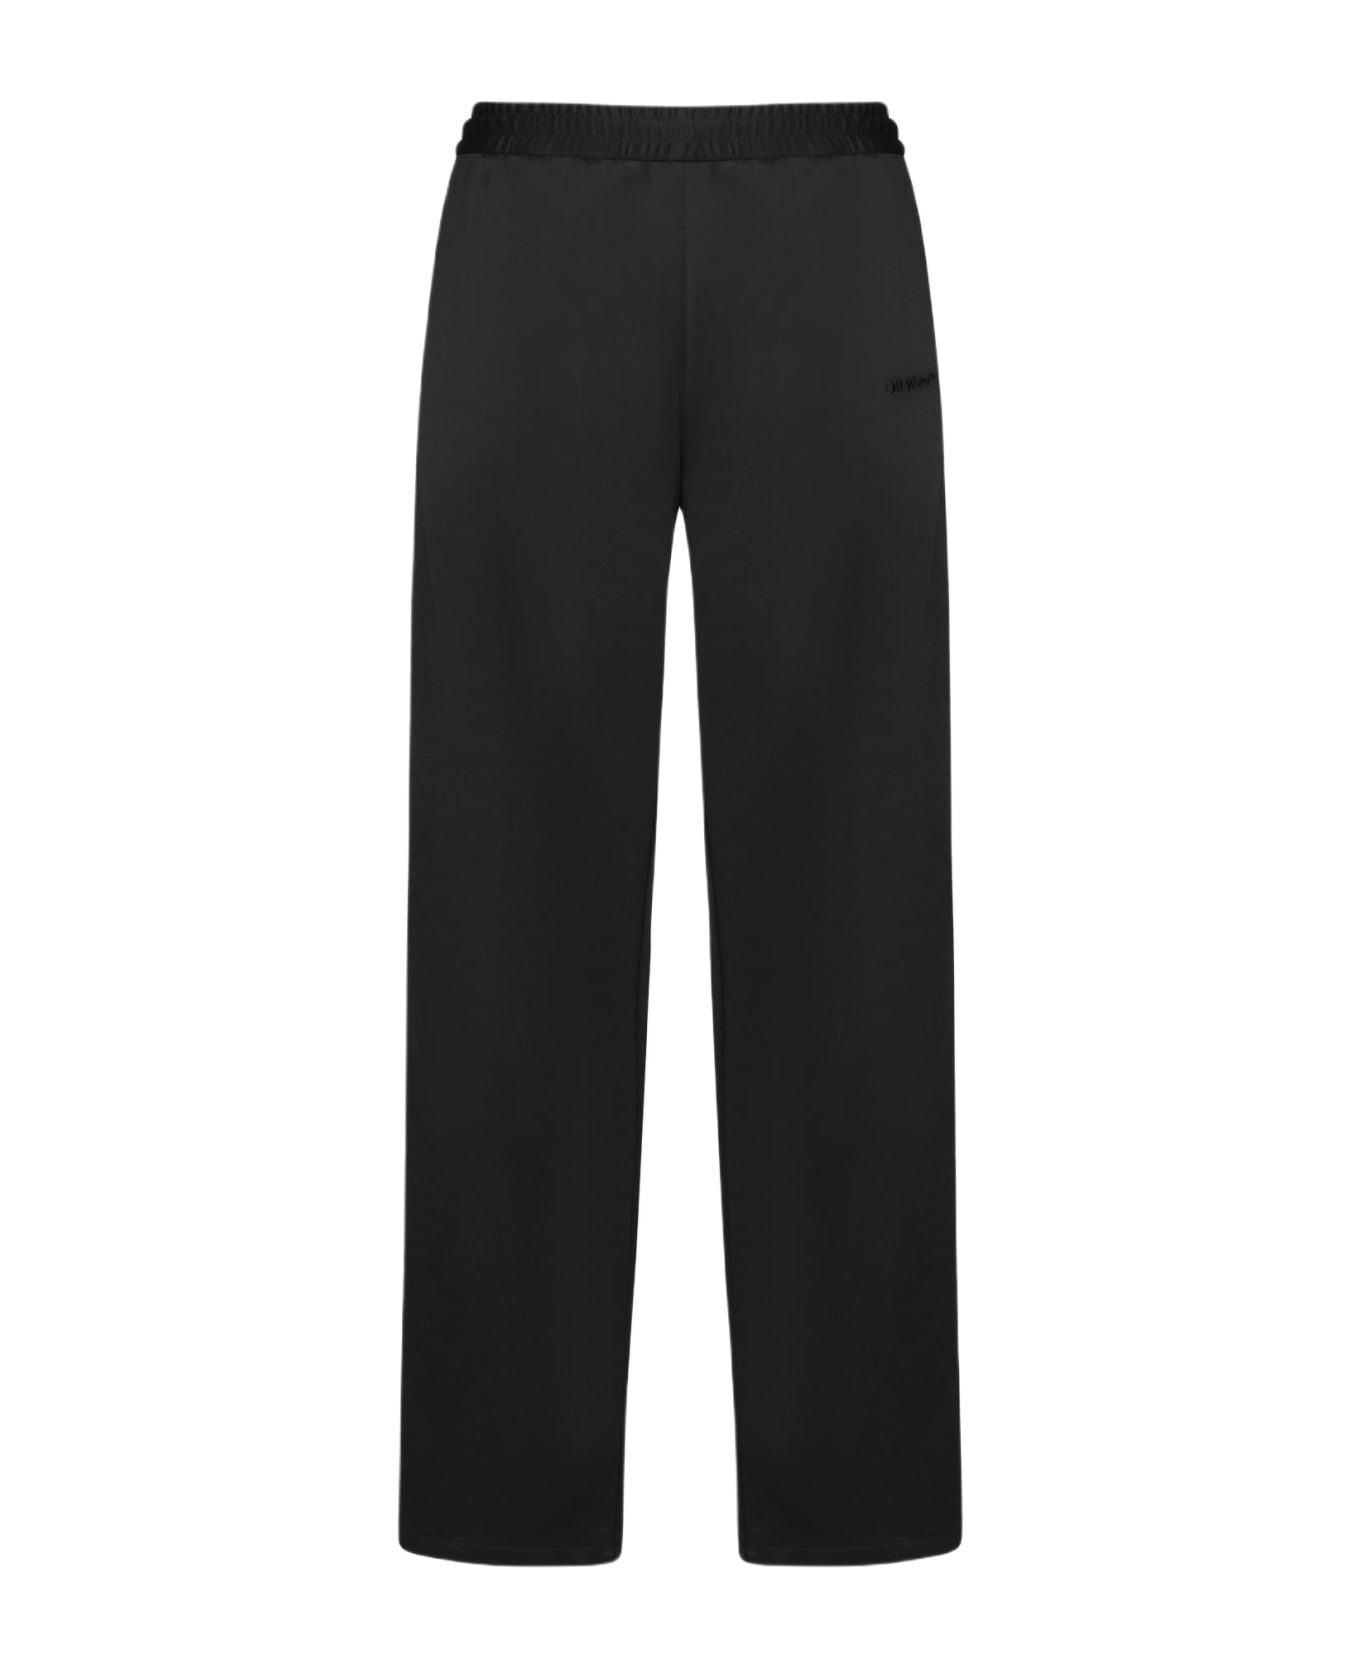 Off-White Ow Face Cotton-blend Track Pants - Black ボトムス